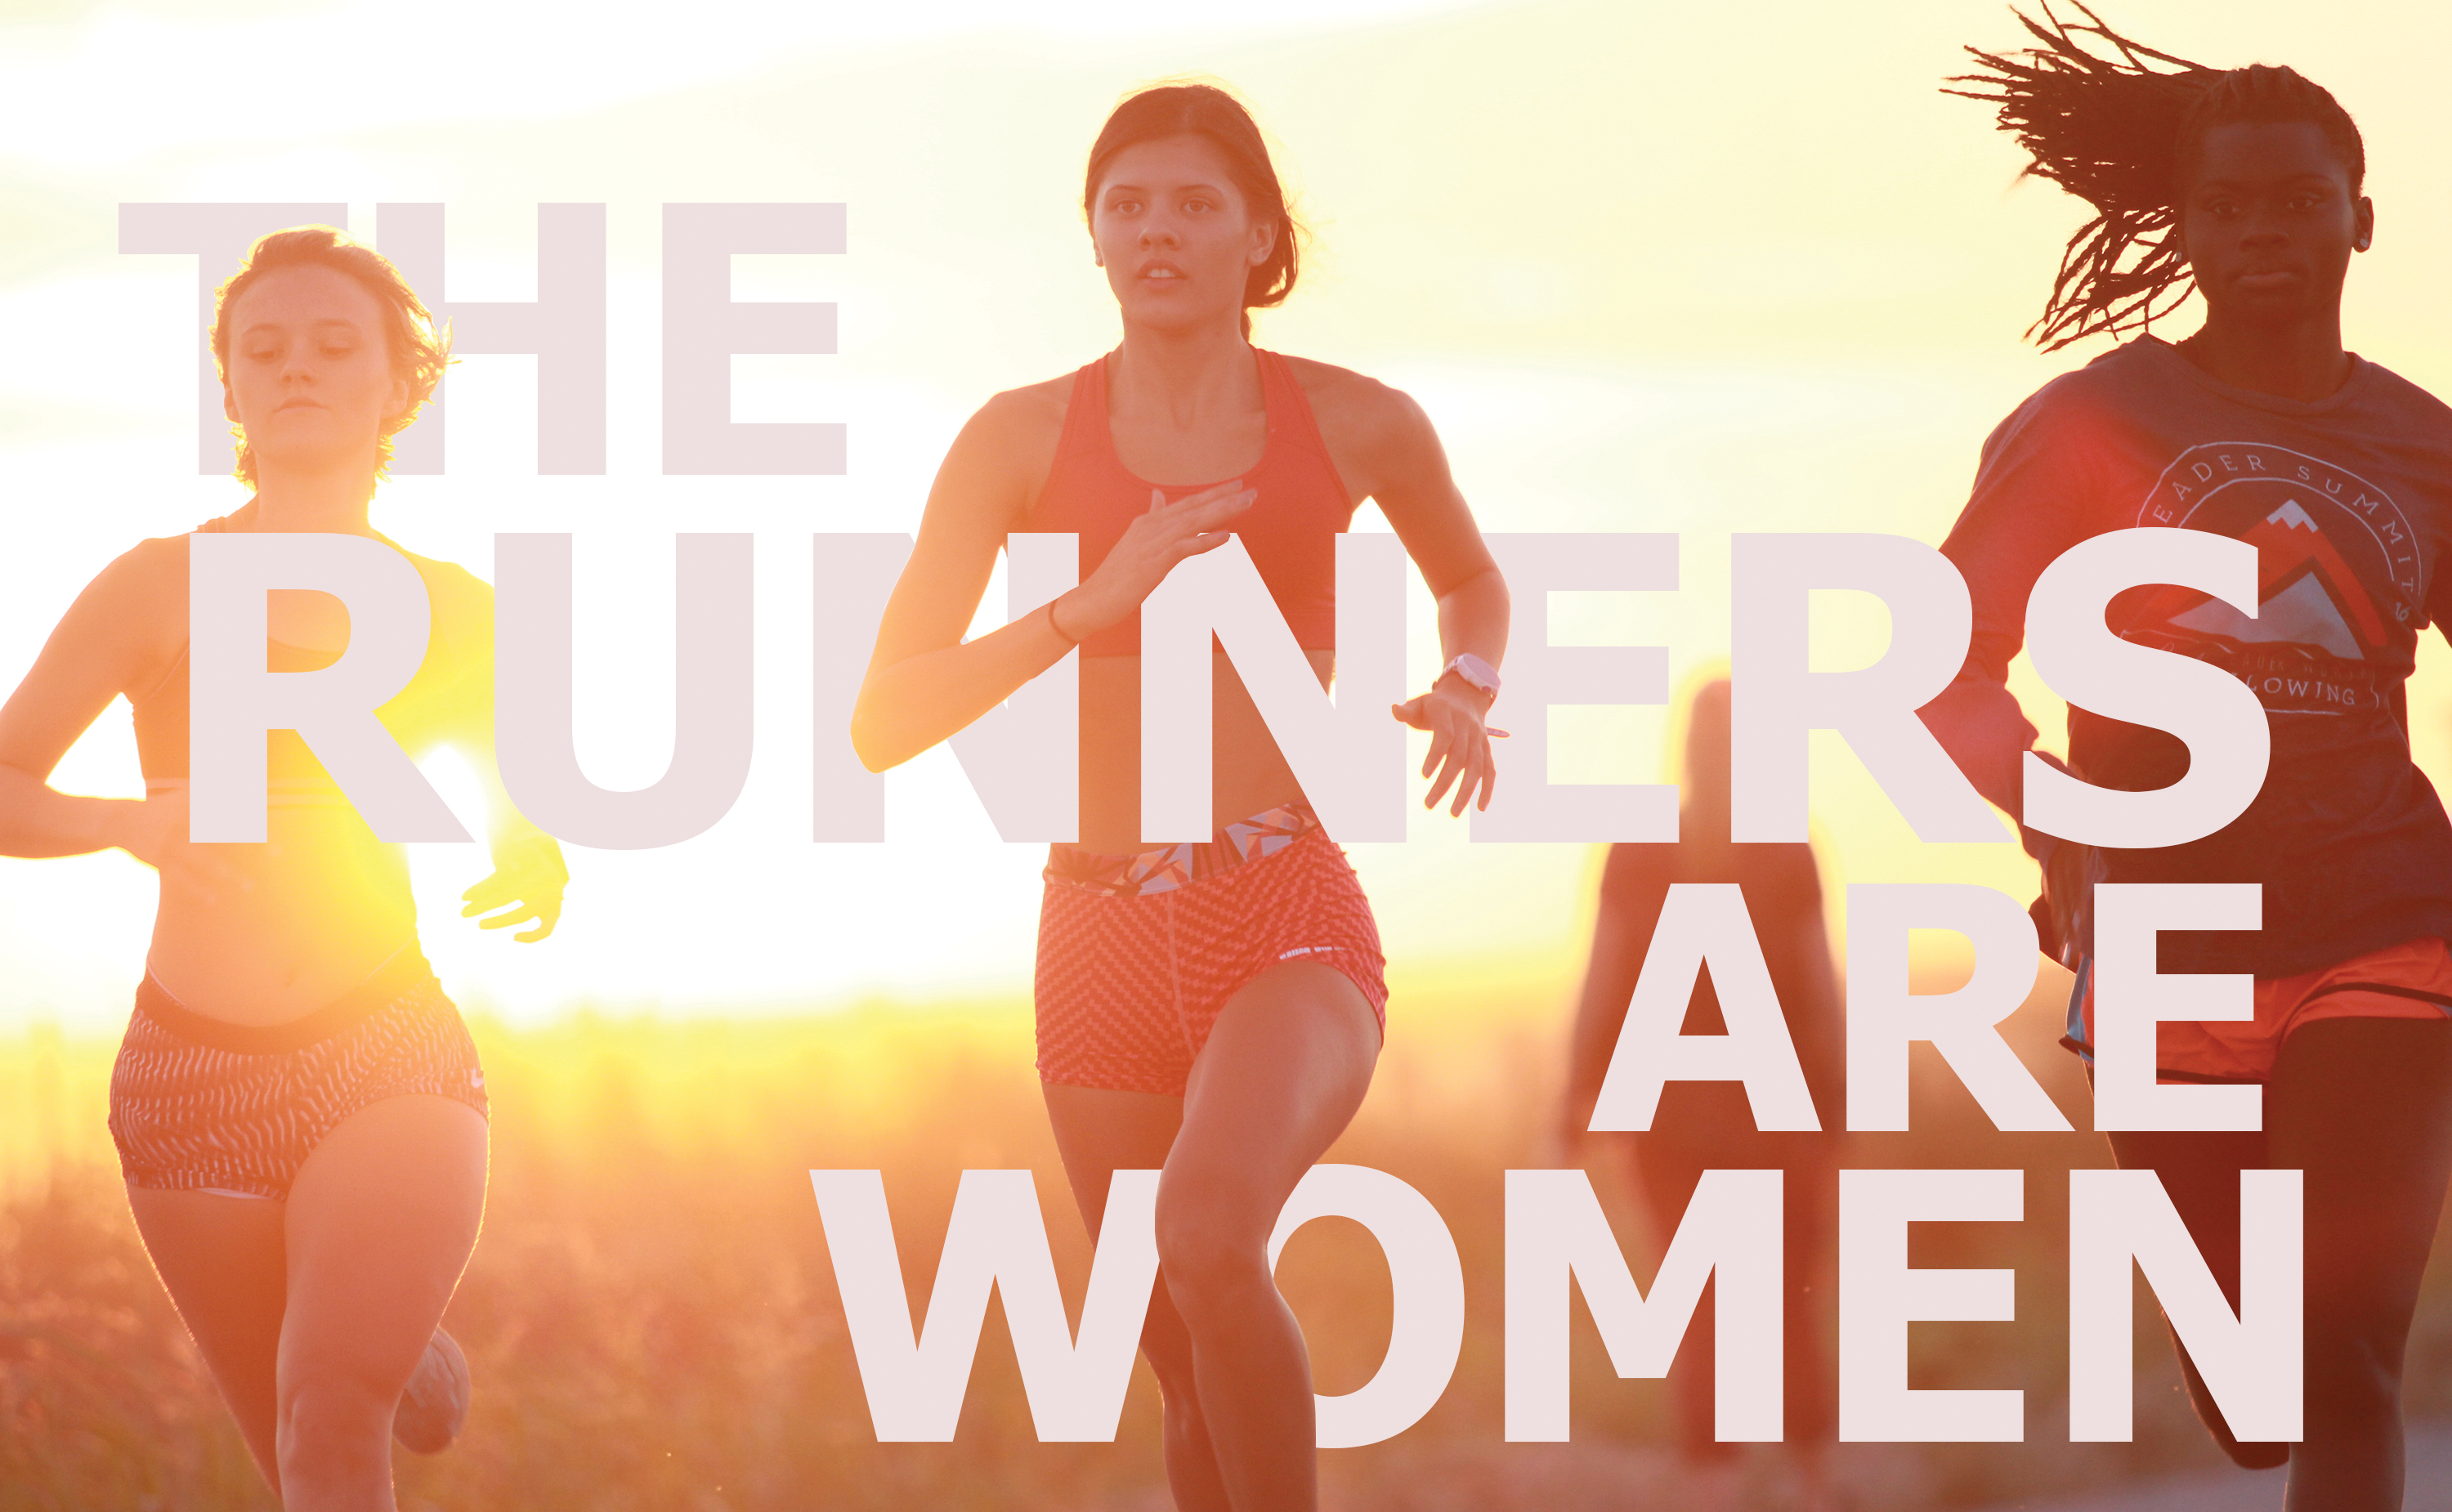 The Runners are Women